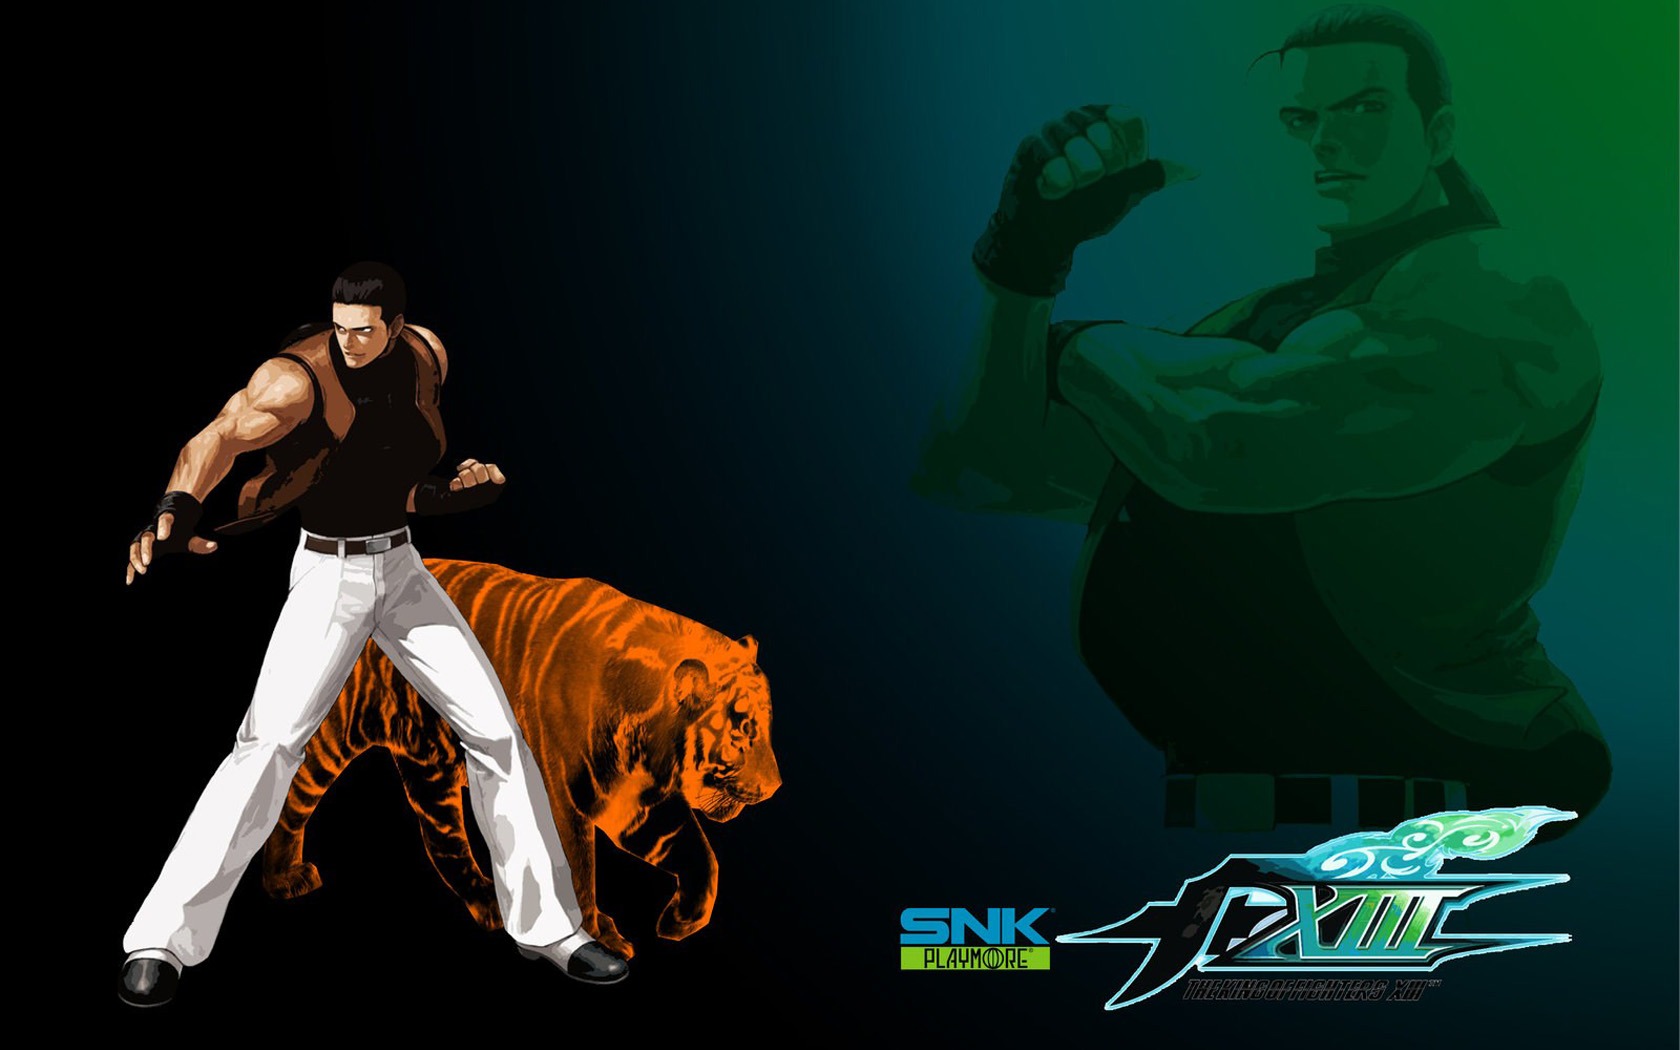 The King of Fighters XIII wallpapers #17 - 1680x1050